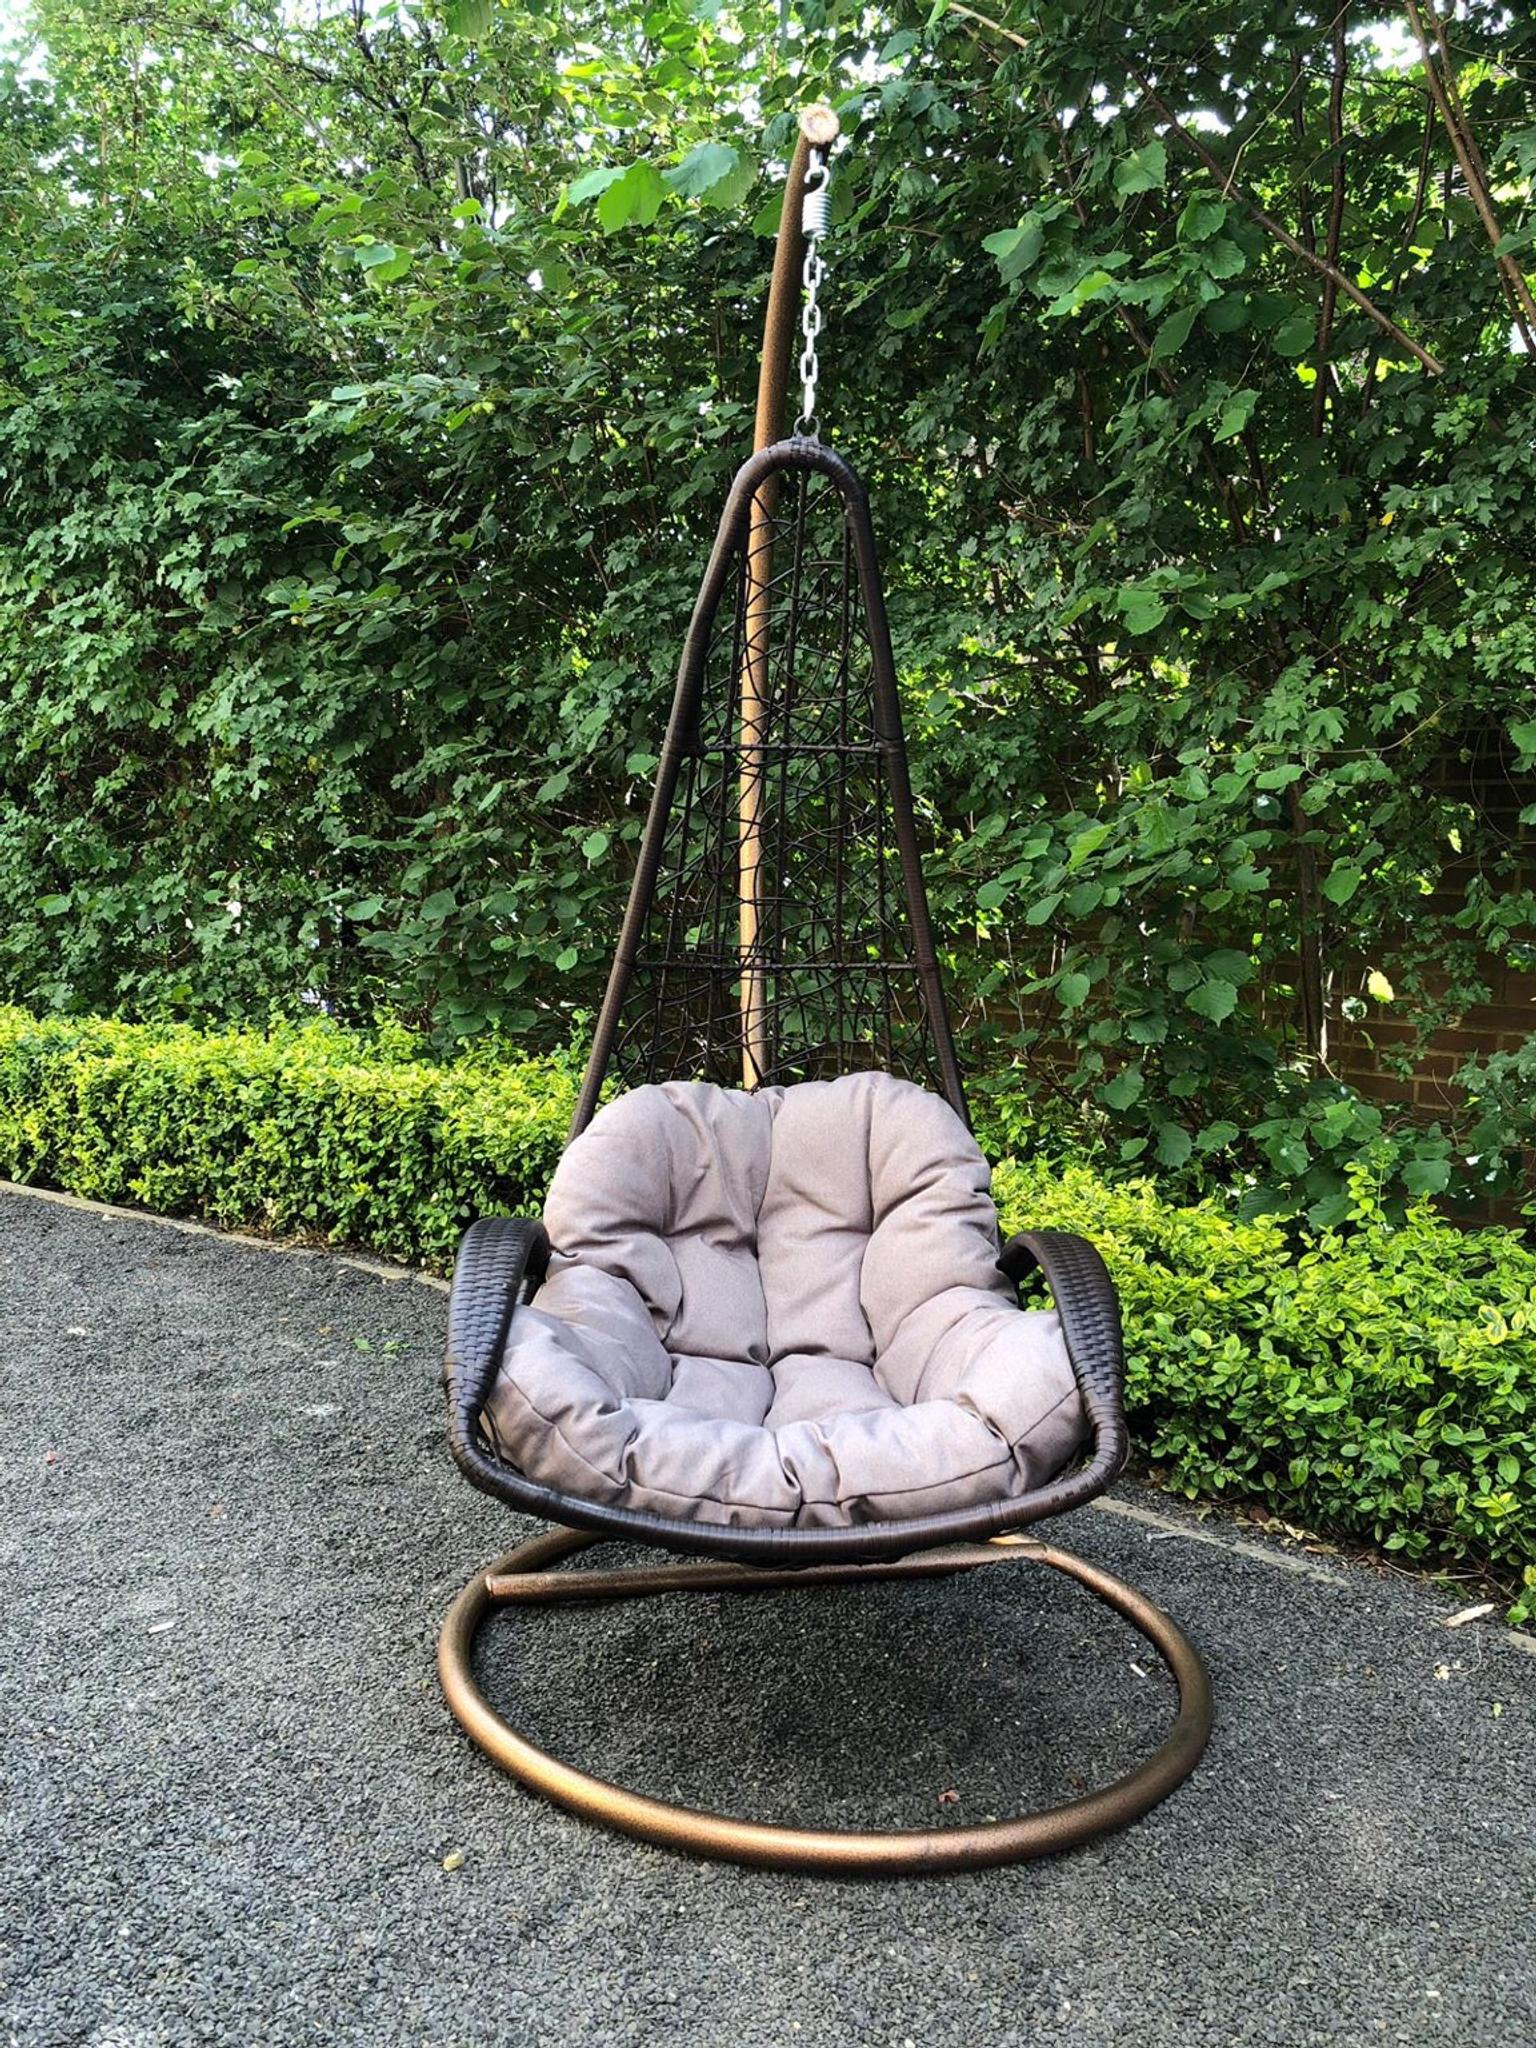 New Rattan Swing Chair With Cushion In W13 London Borough Of